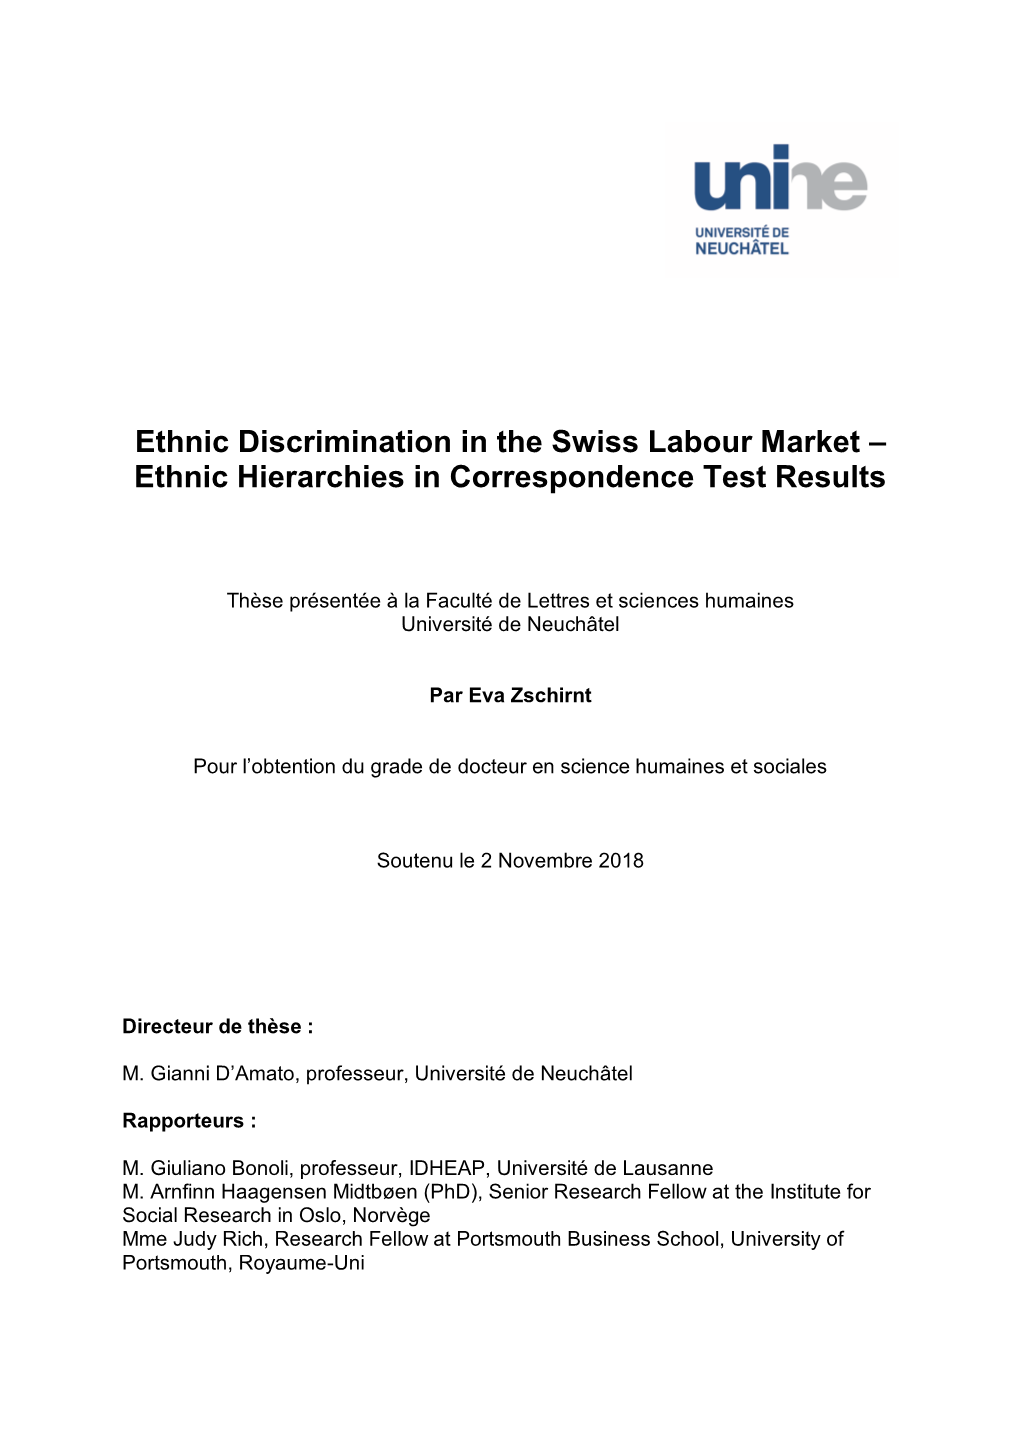 Ethnic Discrimination in the Swiss Labour Market – Ethnic Hierarchies in Correspondence Test Results